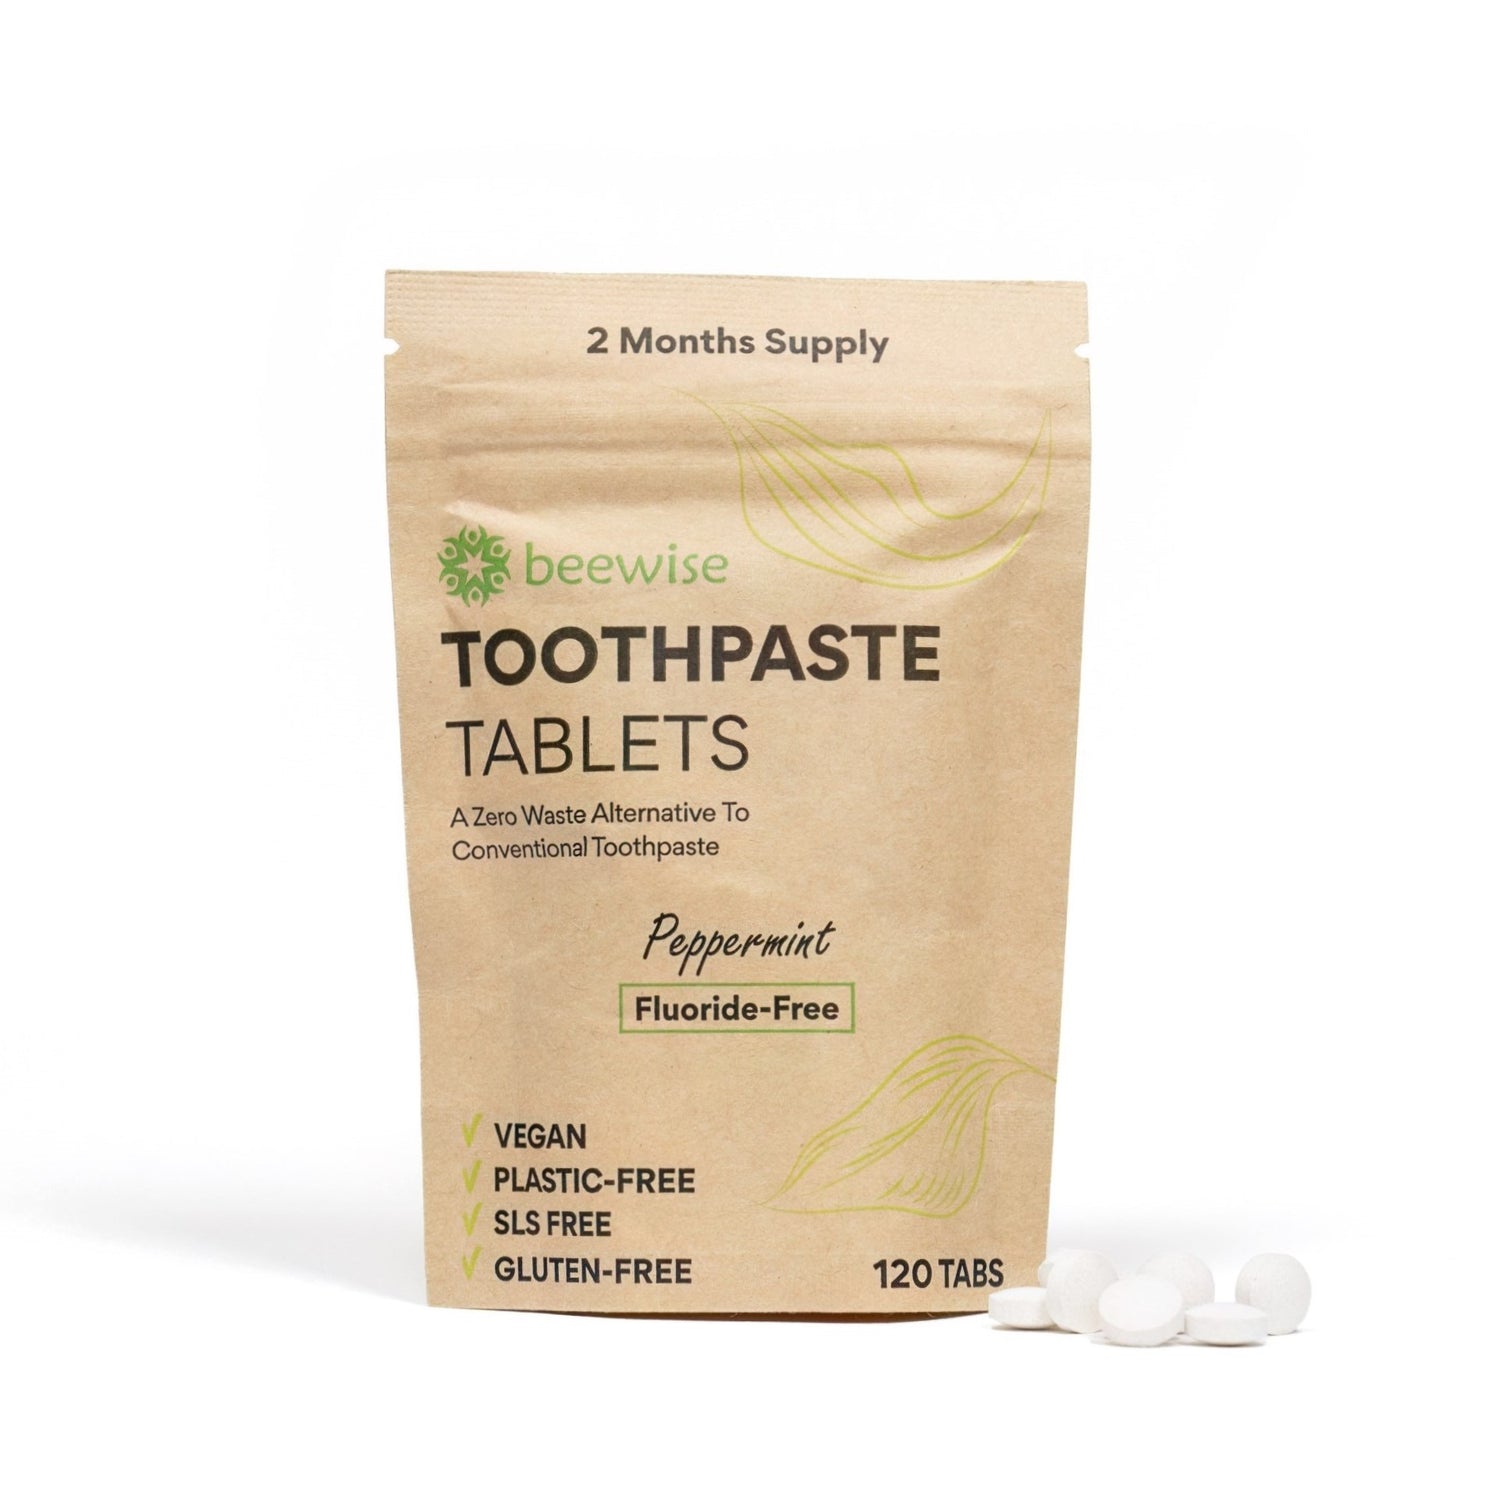 toothpaste tablets in a kraft paper packaging plastic-free made in amsterdam uk